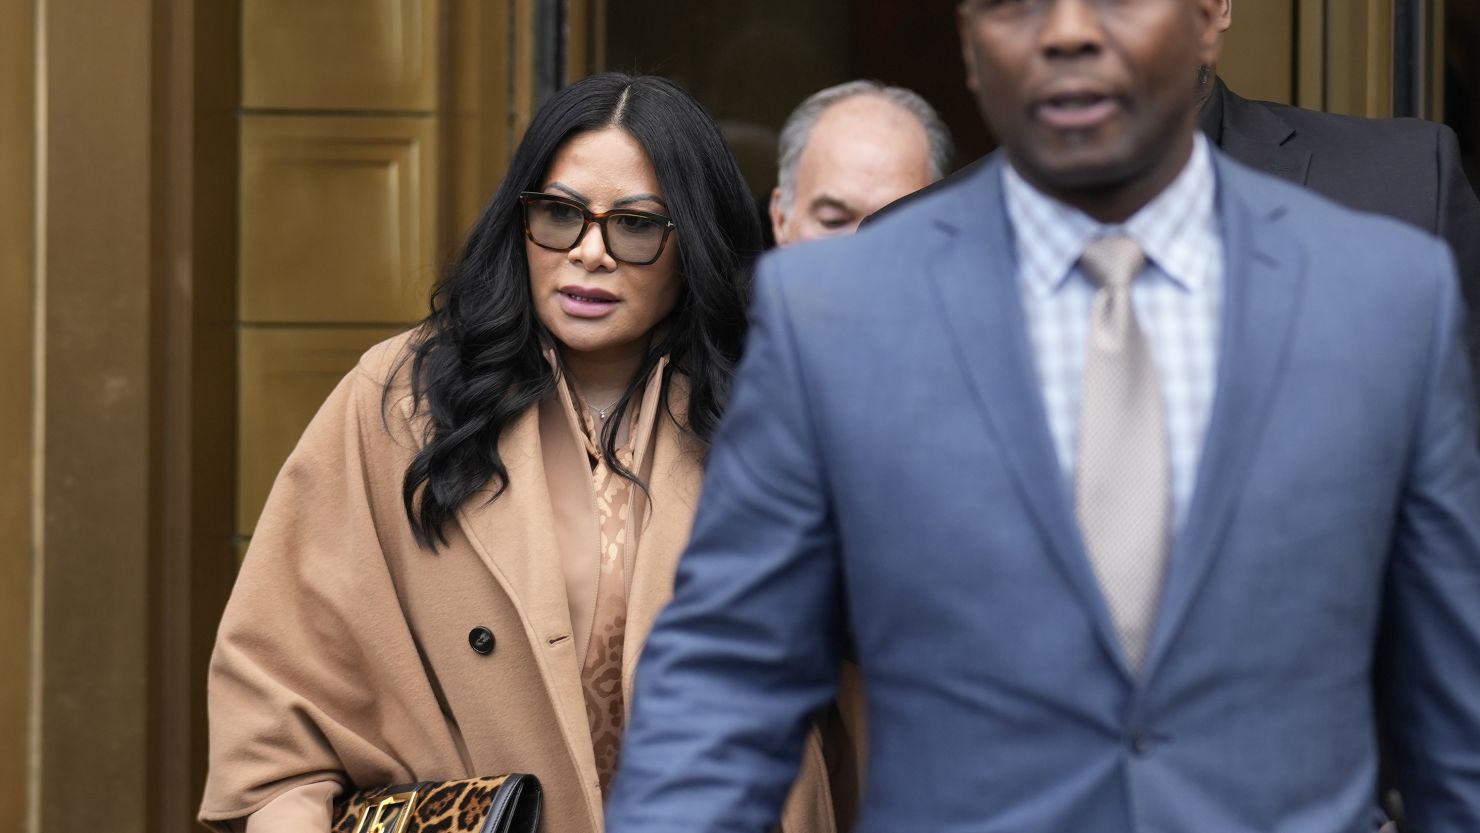 Jennifer Shah leaves a federal court in New York on January 6, 2023. A judge has sentenced Shah, a member of "The Real Housewives of Salt Lake City," to 6 and a half years in prison for helping to defraud thousands of people nationwide in a telemarketing scam. 